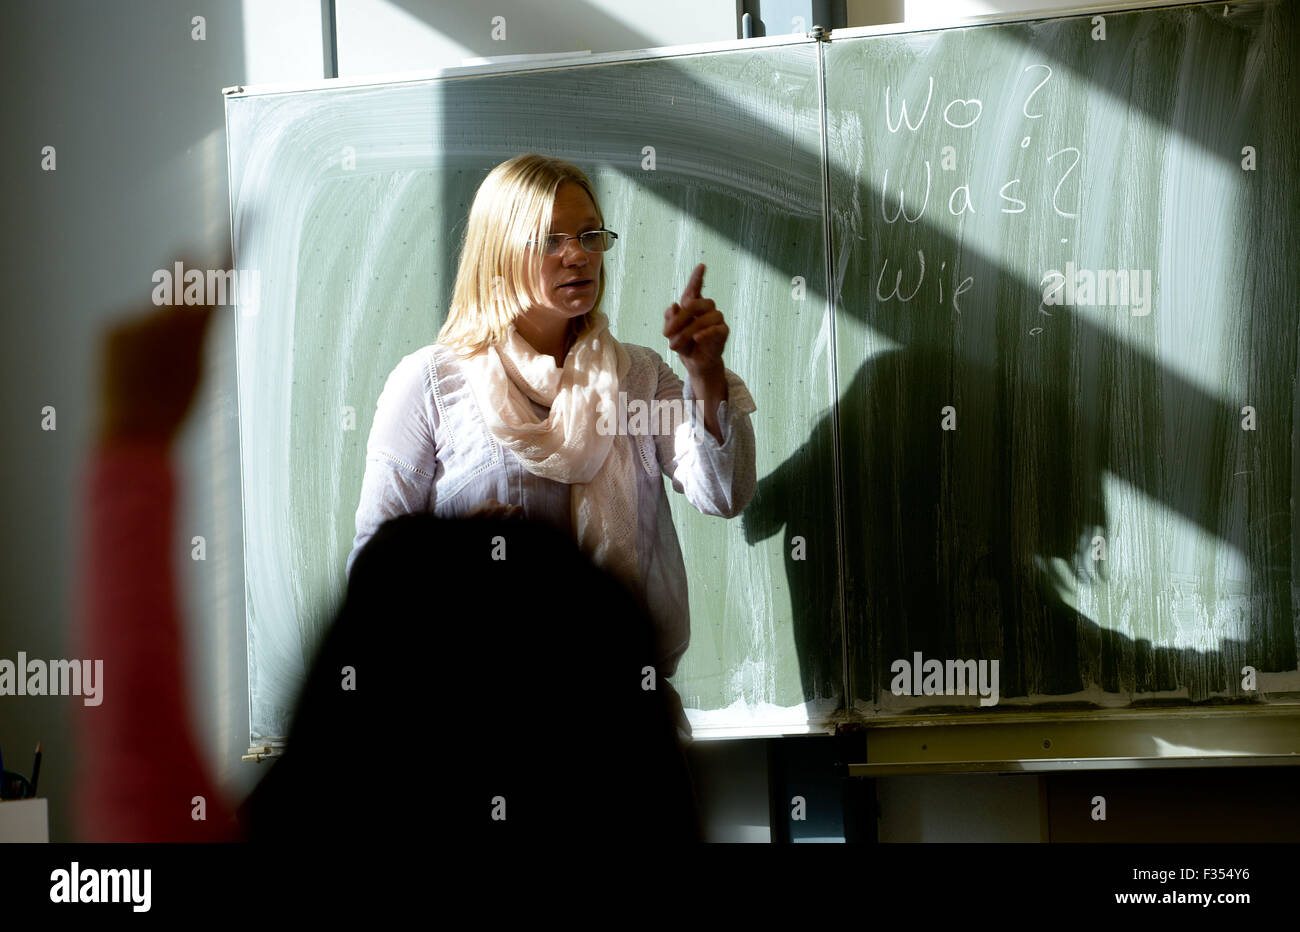 Hanover, Germany. 23rd Sep, 2015. Teacher of a language class, Miriam Frehe, stands in front of a blackboard during class at Peter-Ustinov-Schule in Hanover, Germany, 23 September 2015. 19 boys and girls from age 10 to 16 participate in the class. After one year the students are supposed to speak German well enough to get into a regular school class. PHOTO: PETER STEFFEN/DPA/Alamy Live News Stock Photo